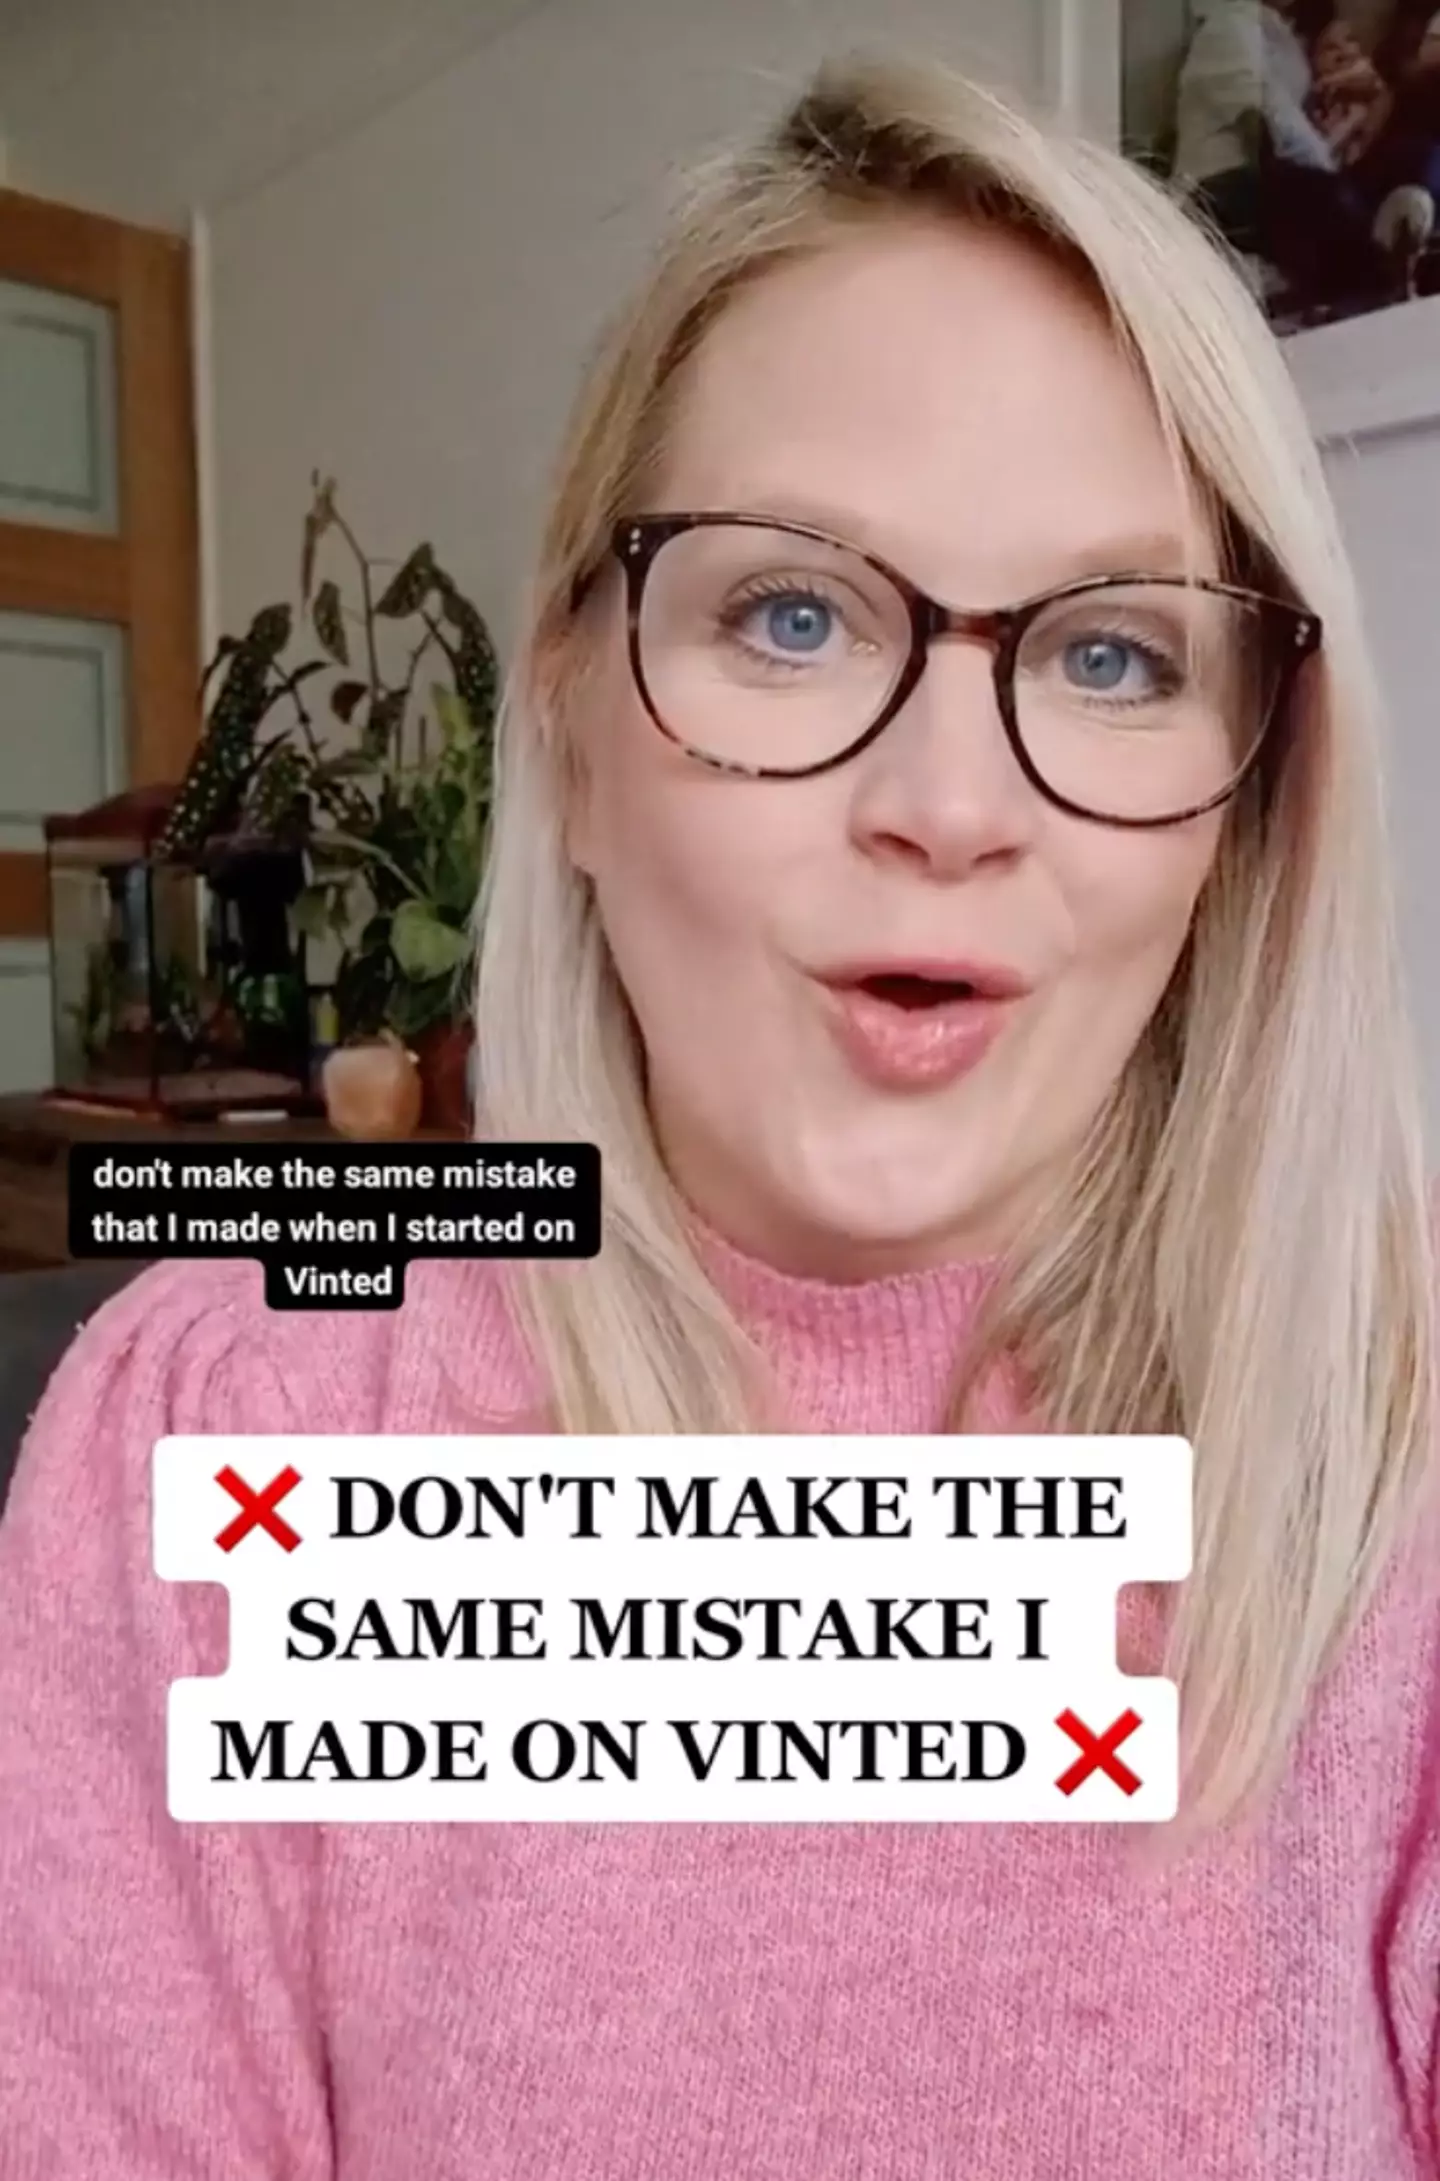 One experienced Vinted seller shared her number one top tip.